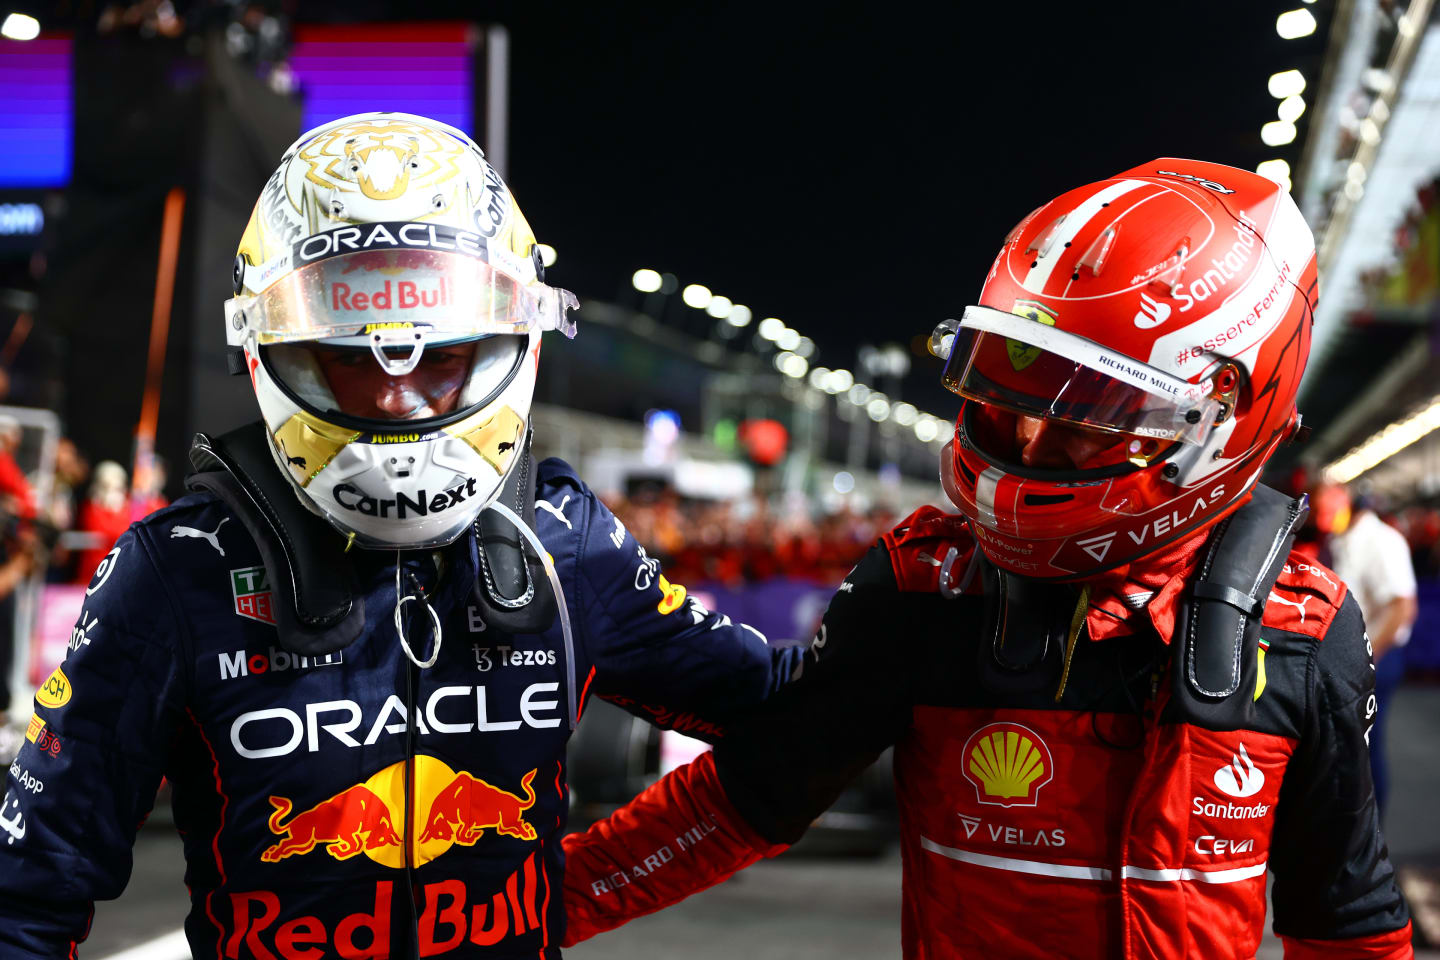 JEDDAH, SAUDI ARABIA - MARCH 27: Race winner Max Verstappen of the Netherlands and Oracle Red Bull Racing and Second placed Charles Leclerc of Monaco and Ferrari talk in parc ferme during the F1 Grand Prix of Saudi Arabia at the Jeddah Corniche Circuit on March 27, 2022 in Jeddah, Saudi Arabia. (Photo by Mark Thompson/Getty Images)